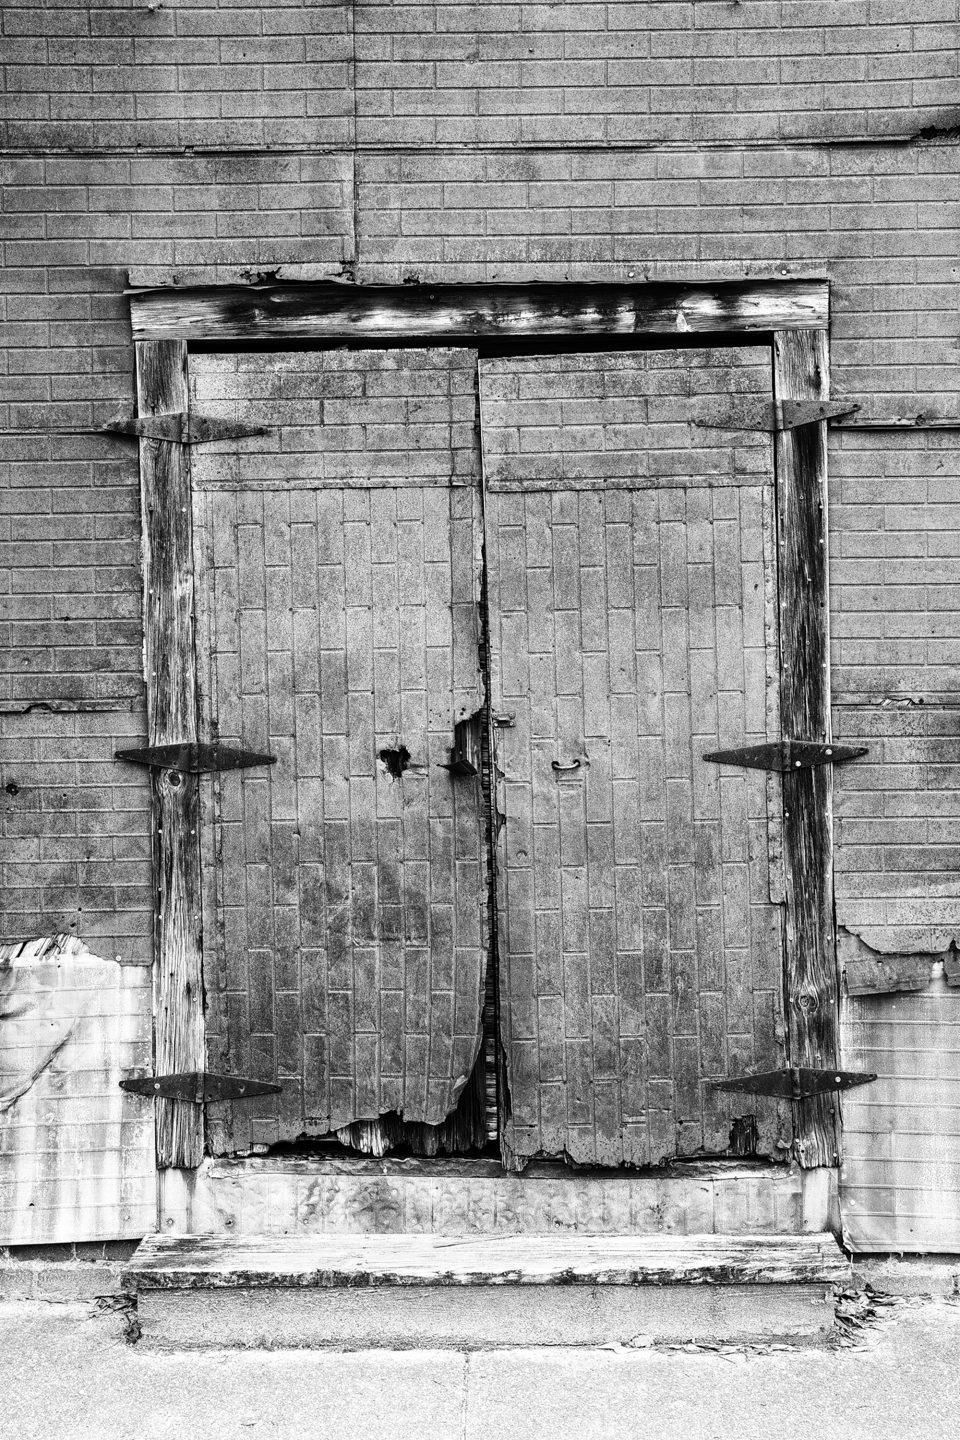 Front Doors of a Rusty Cotton Warehouse in Newbern, Alabama - Black and White Photograph by Keith Dotson.